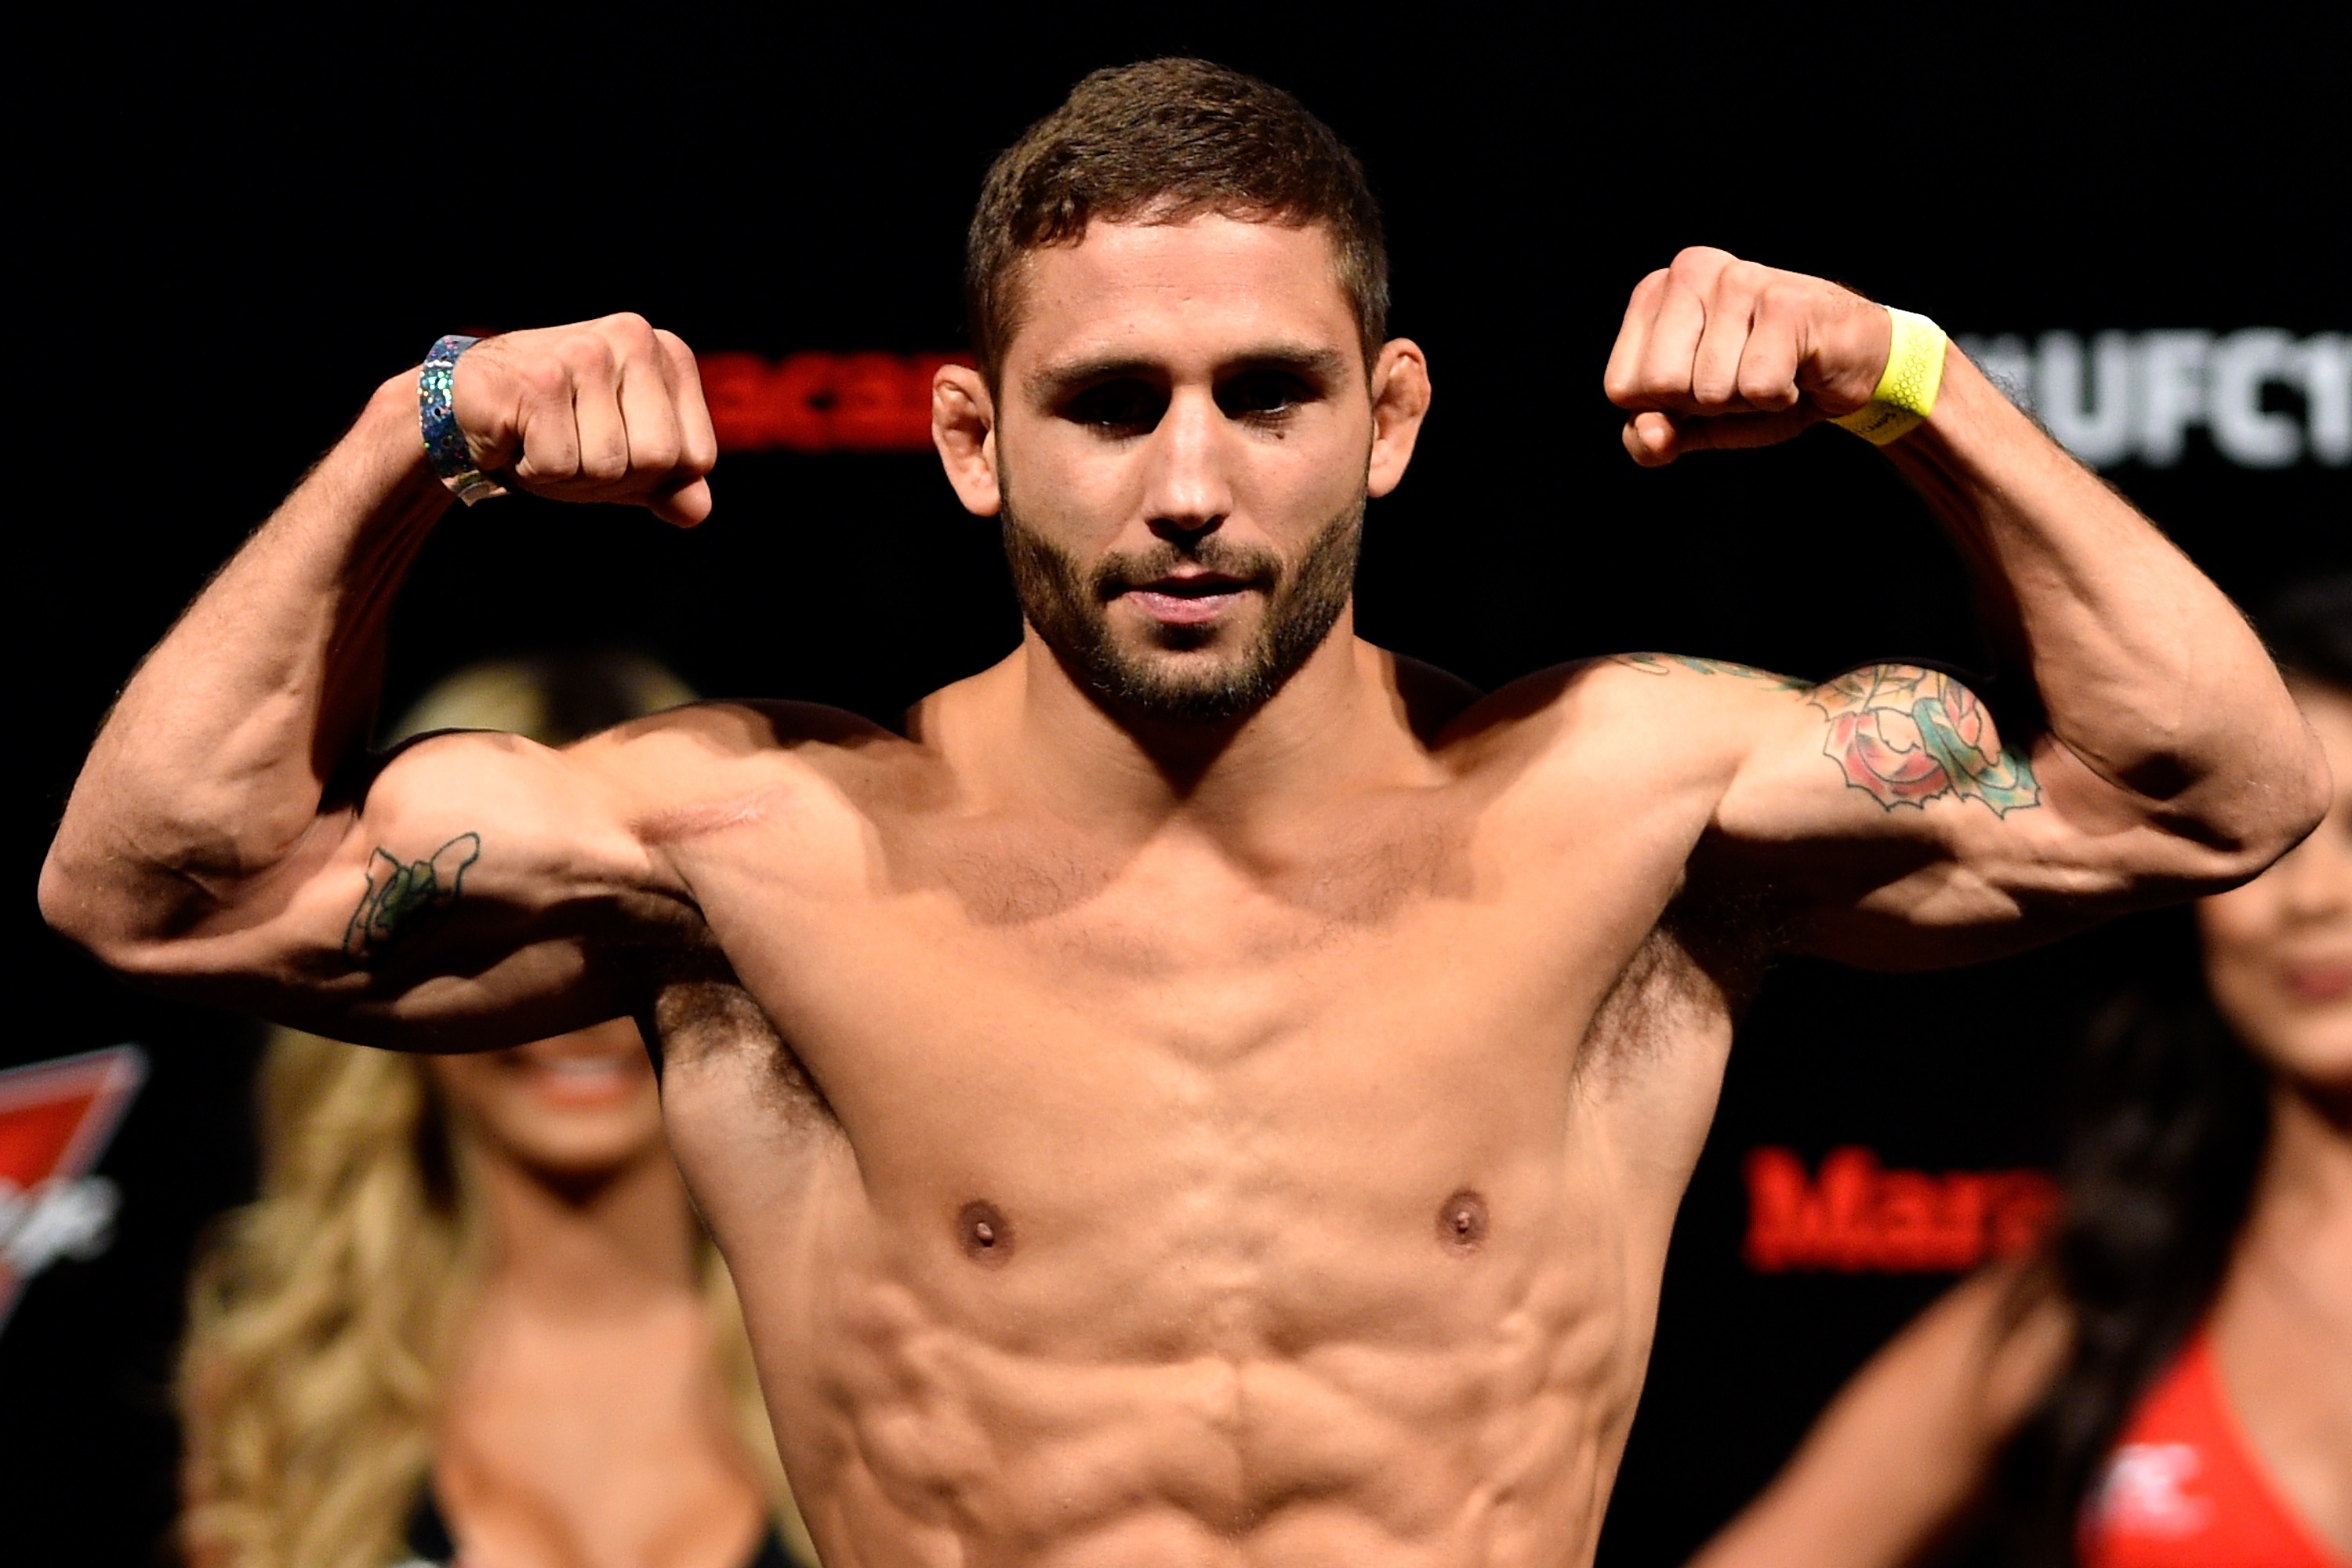 Clay believes challenger Chad Mendes will have his hands raised tonight at UFC 179. (Photo by Buda Mendes/Getty Images)